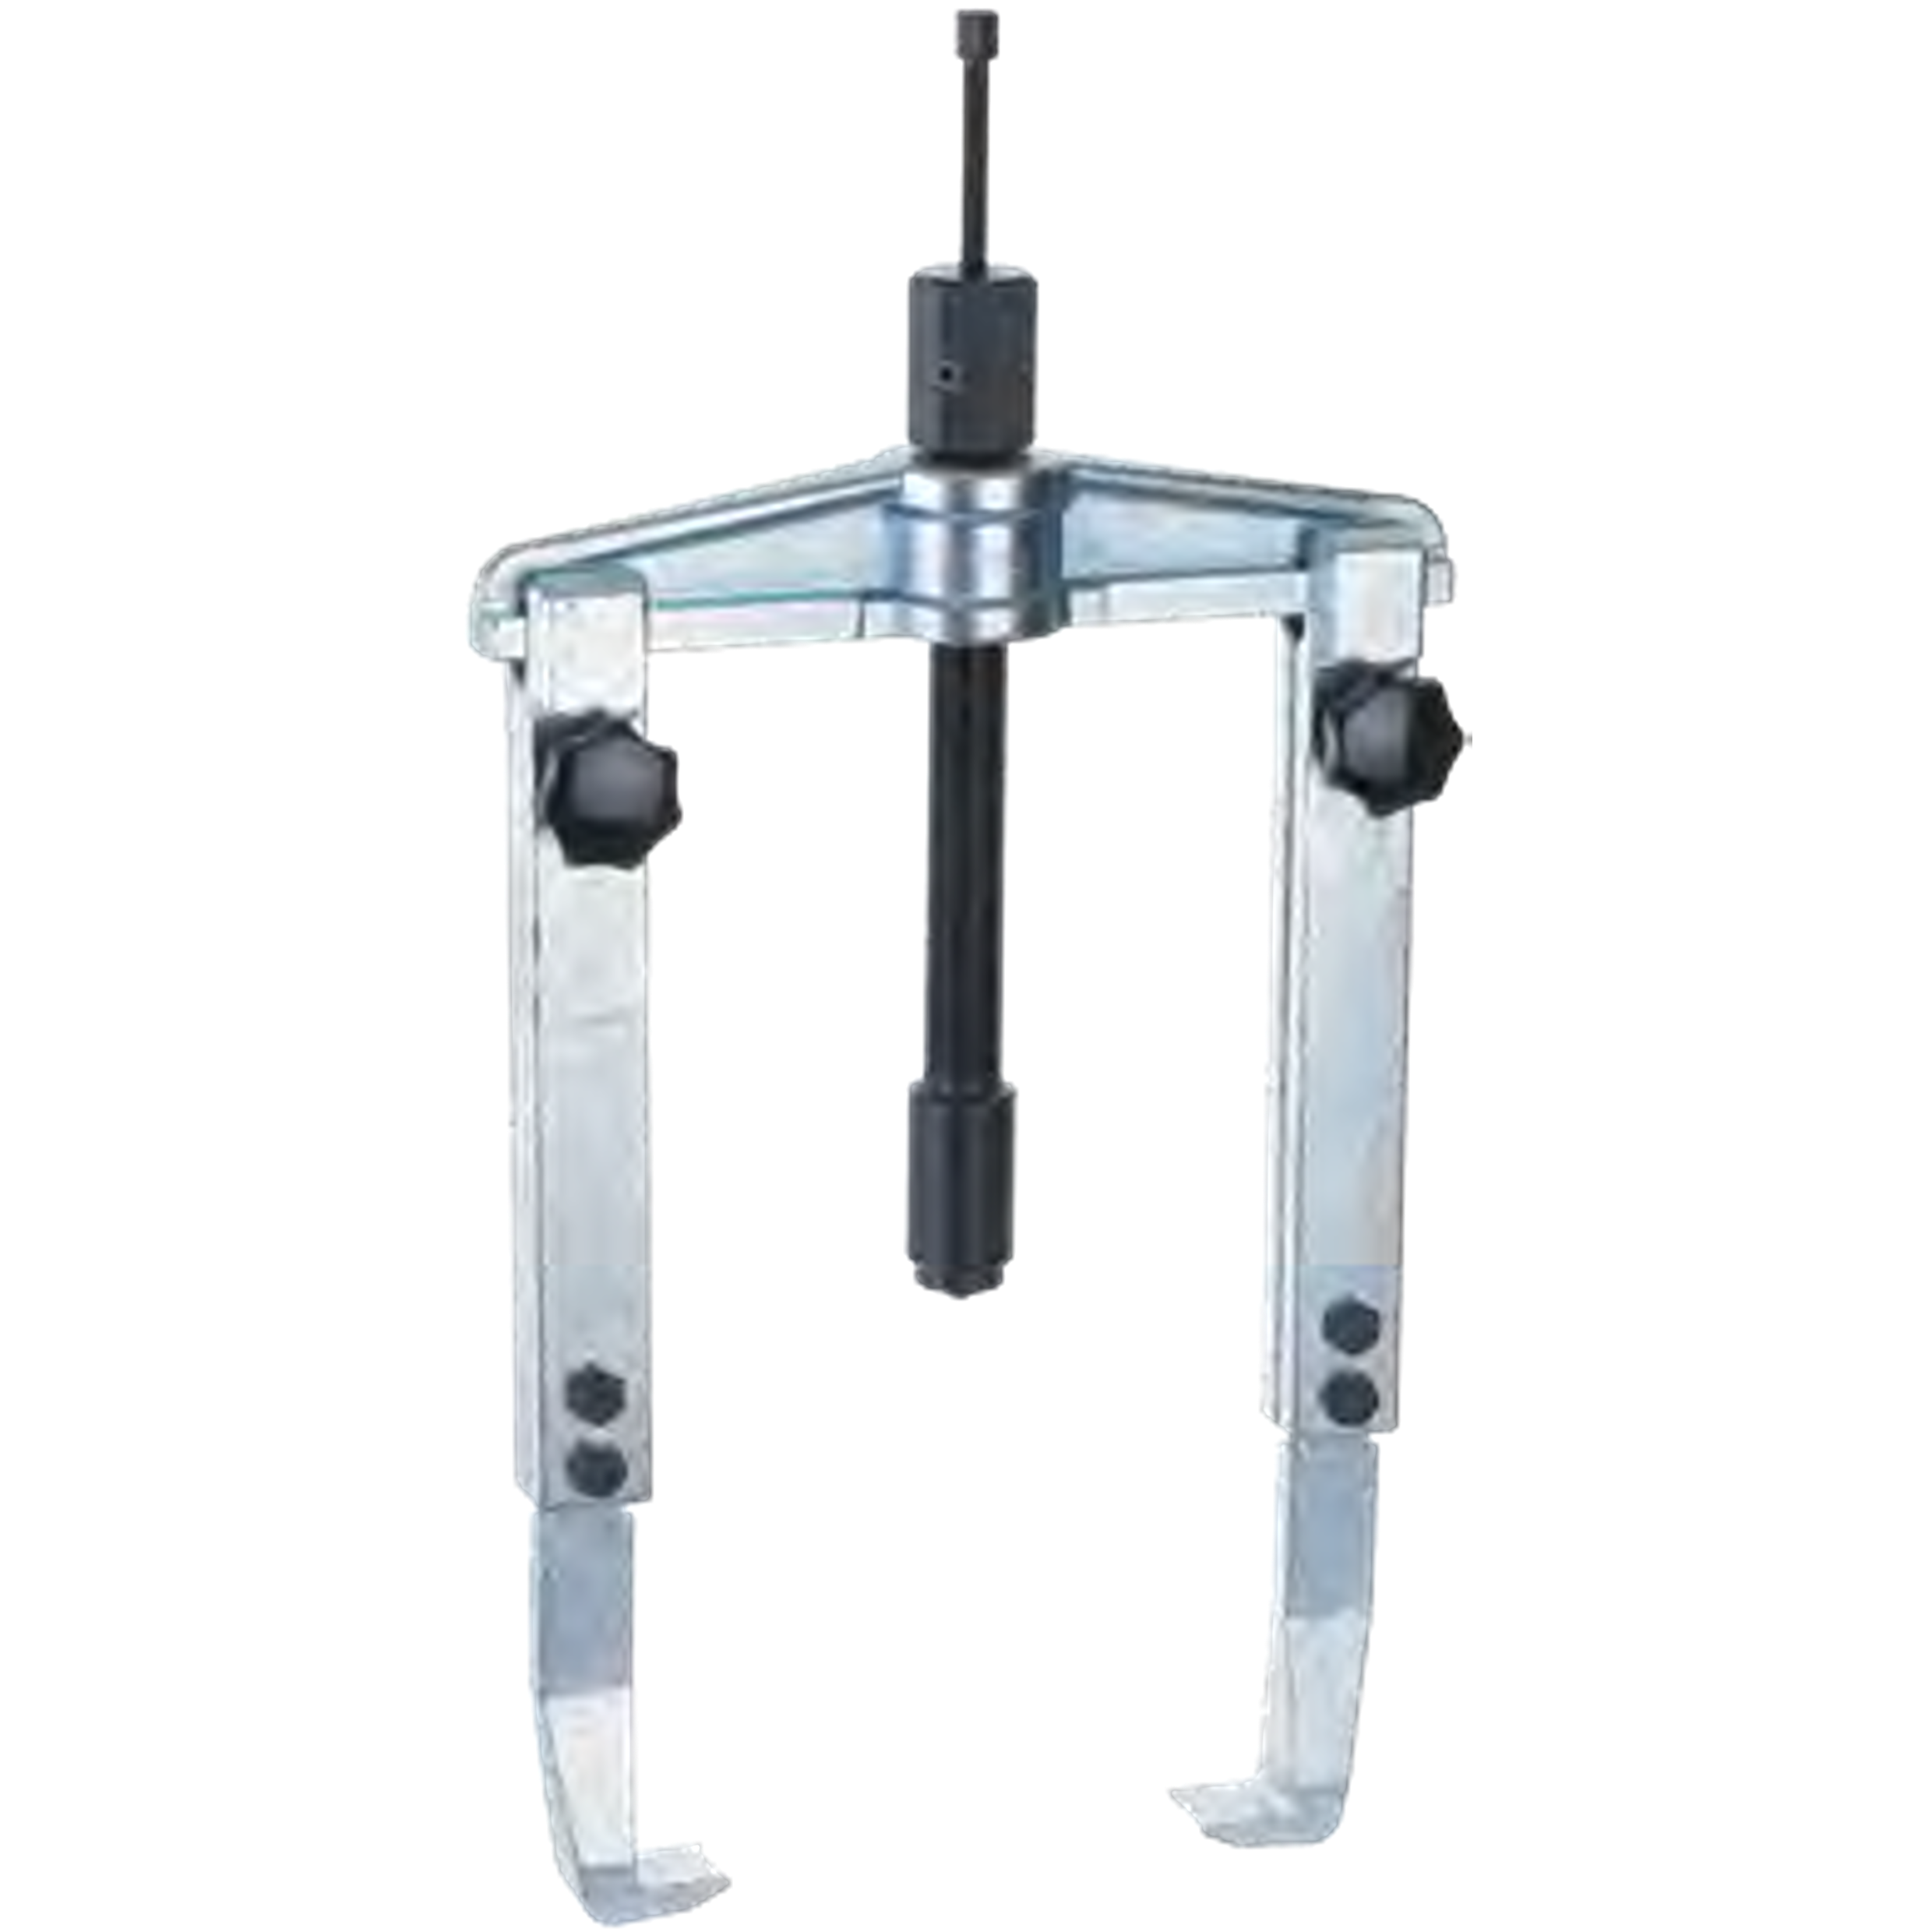 NEXUS EF100-3 2-Arm Universal Puller With Extended Legs - Premium 2-Arm Universal Puller from NEXUS - Shop now at Yew Aik.